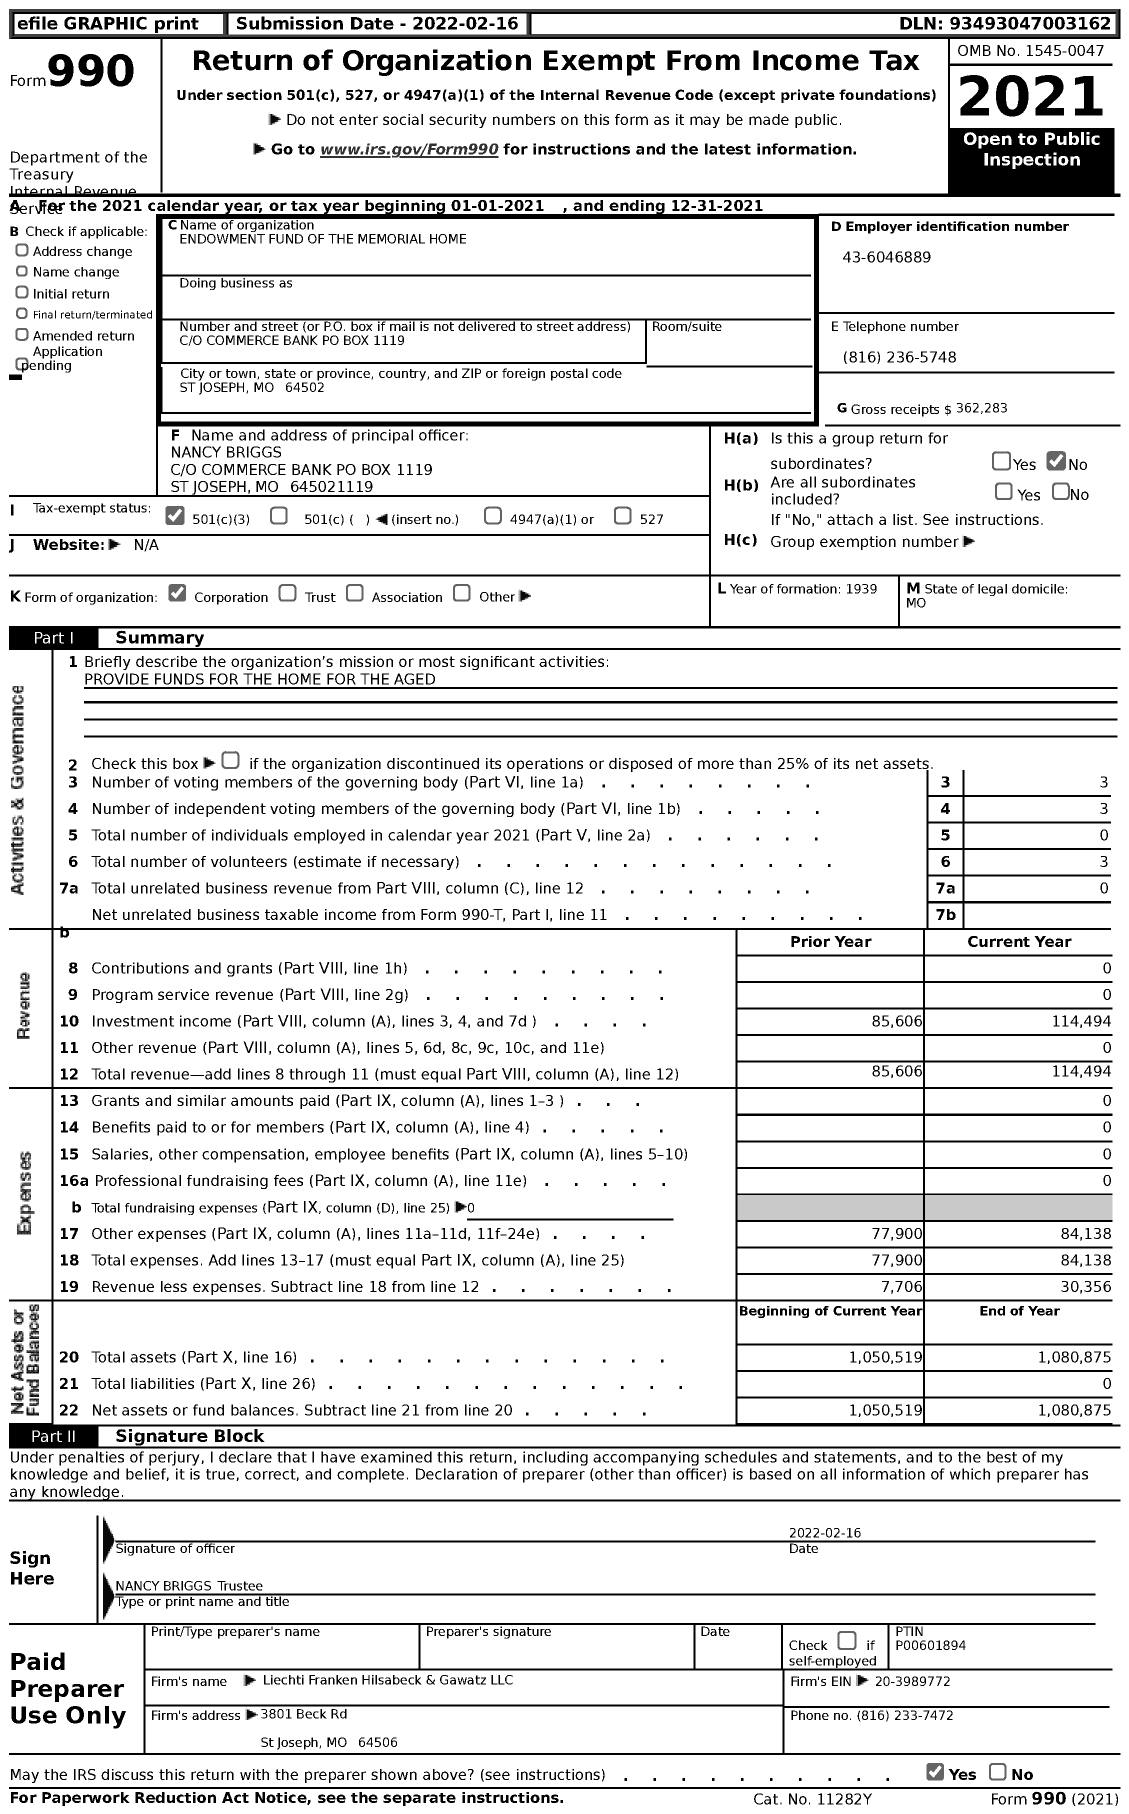 Image of first page of 2021 Form 990 for Endowment Fund of the Memorial Home